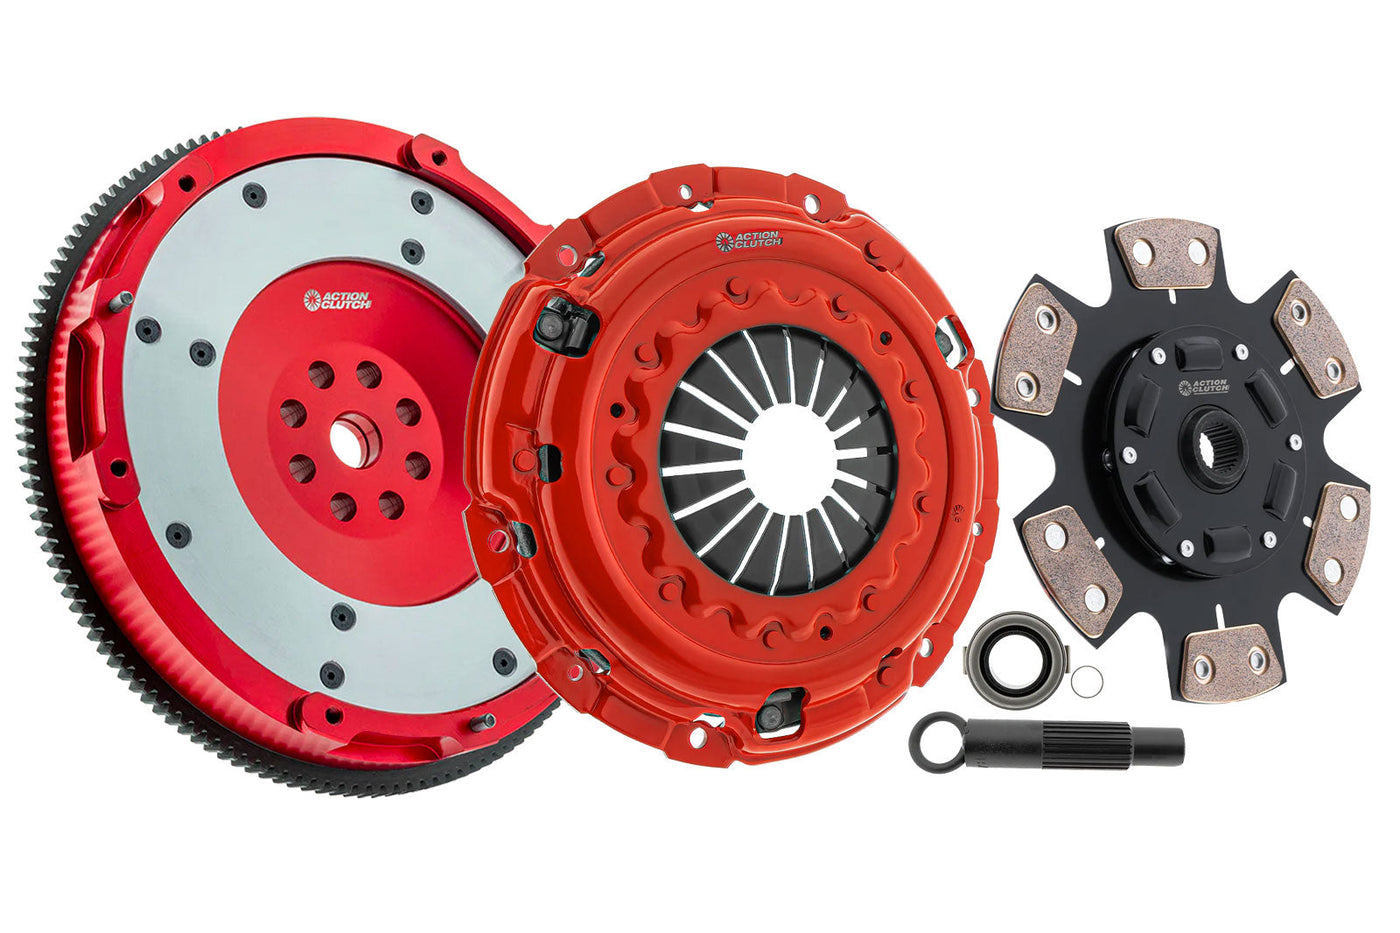 Stage 5 Clutch Kit (2MS) for Honda Civic SI 2022 1.5L (L15B7) Turbo Includes Aluminum Lightweight Flywheel